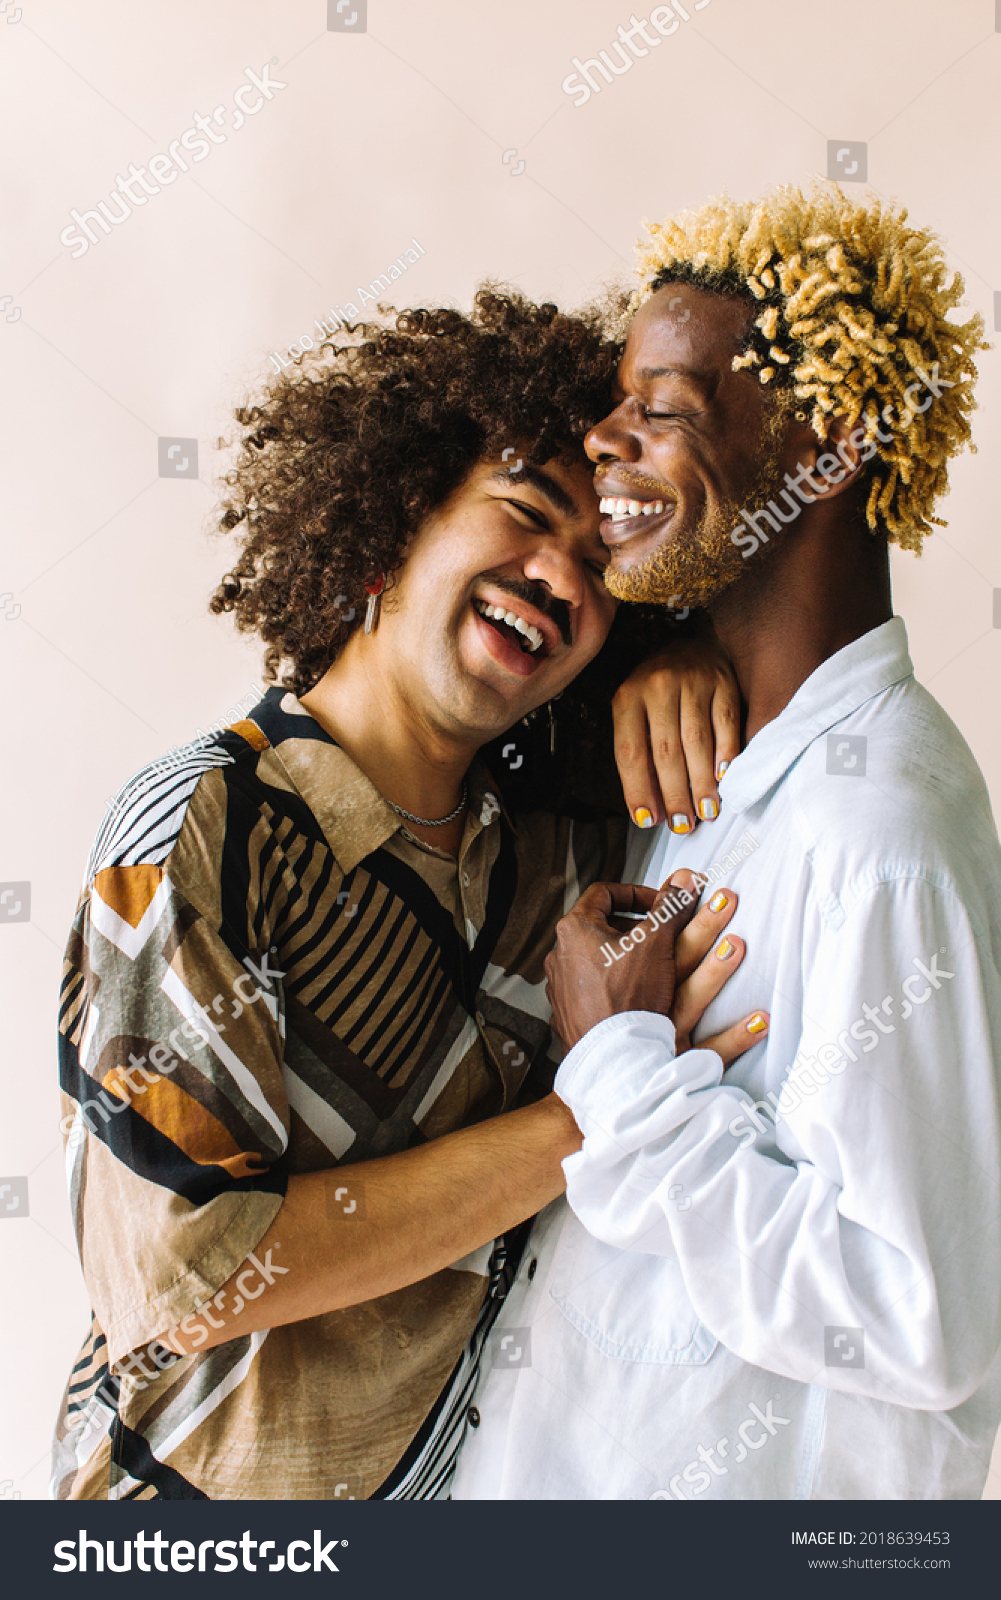 Carefree young gay couple standing together in a studio. Two affectionate male lovers smiling cheerfully while embracing each other against a studio background. Young gay coupe being romantic. #2018639453